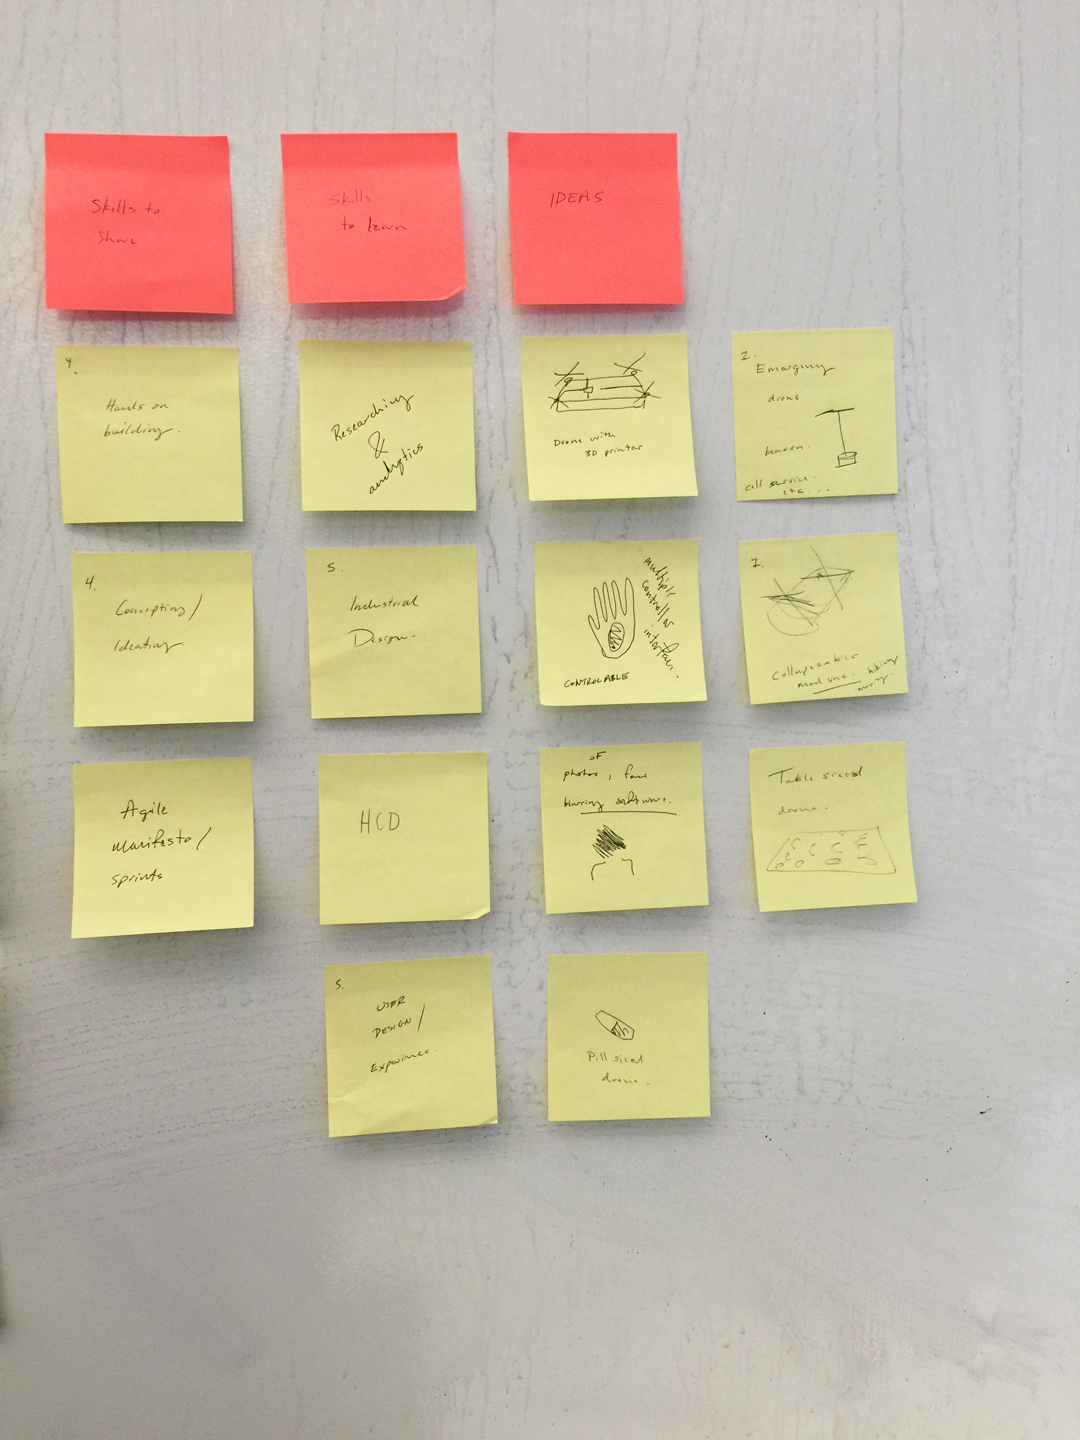 Visual example of brainstorming using sticky notes.